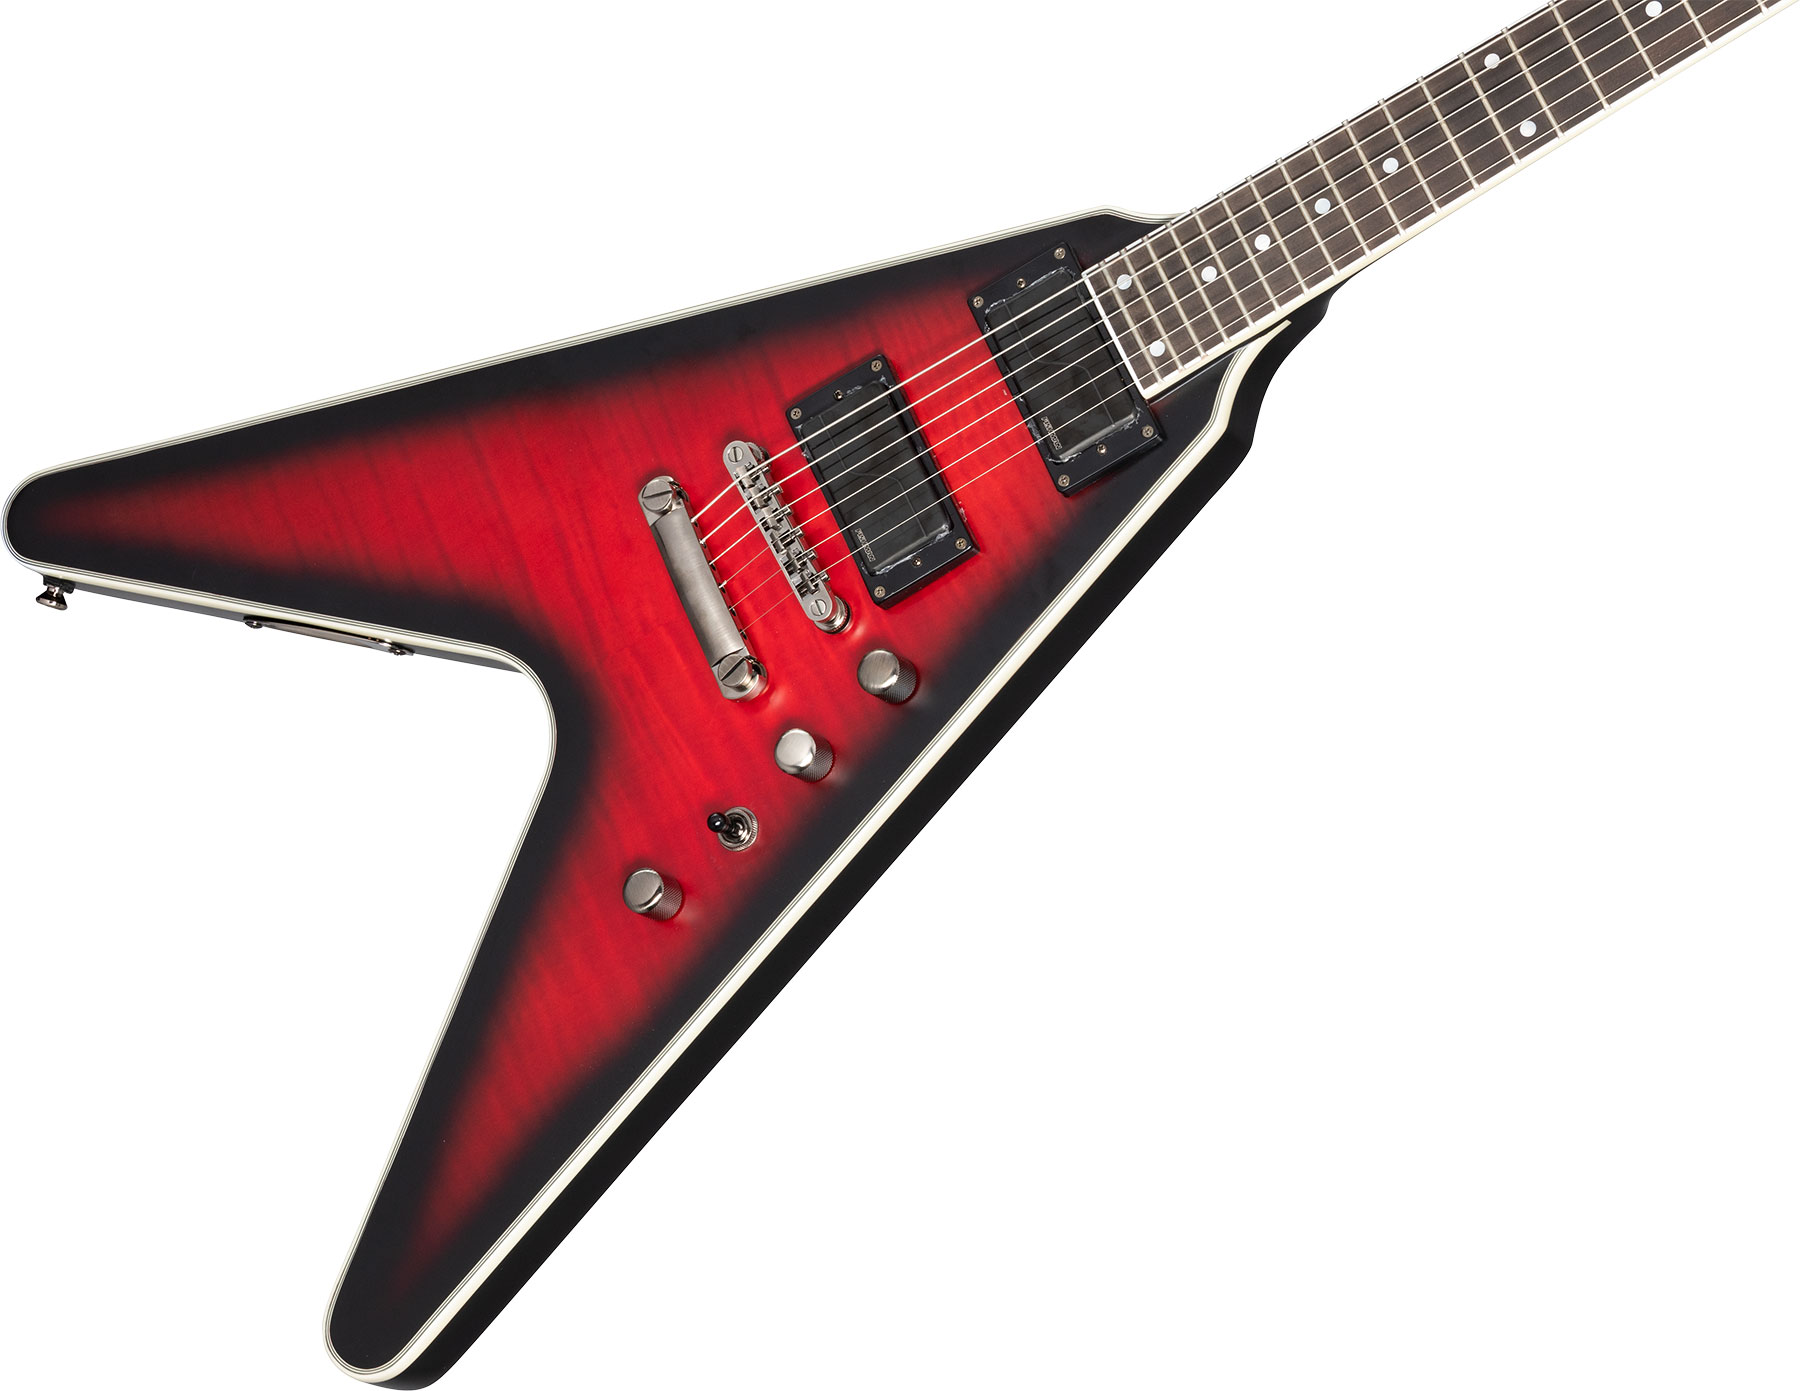 Epiphone Dave Mustaine Flying V Prophecy 2h Fishman Fluence Ht Eb - Aged Dark Red Burst - Metal electric guitar - Variation 3